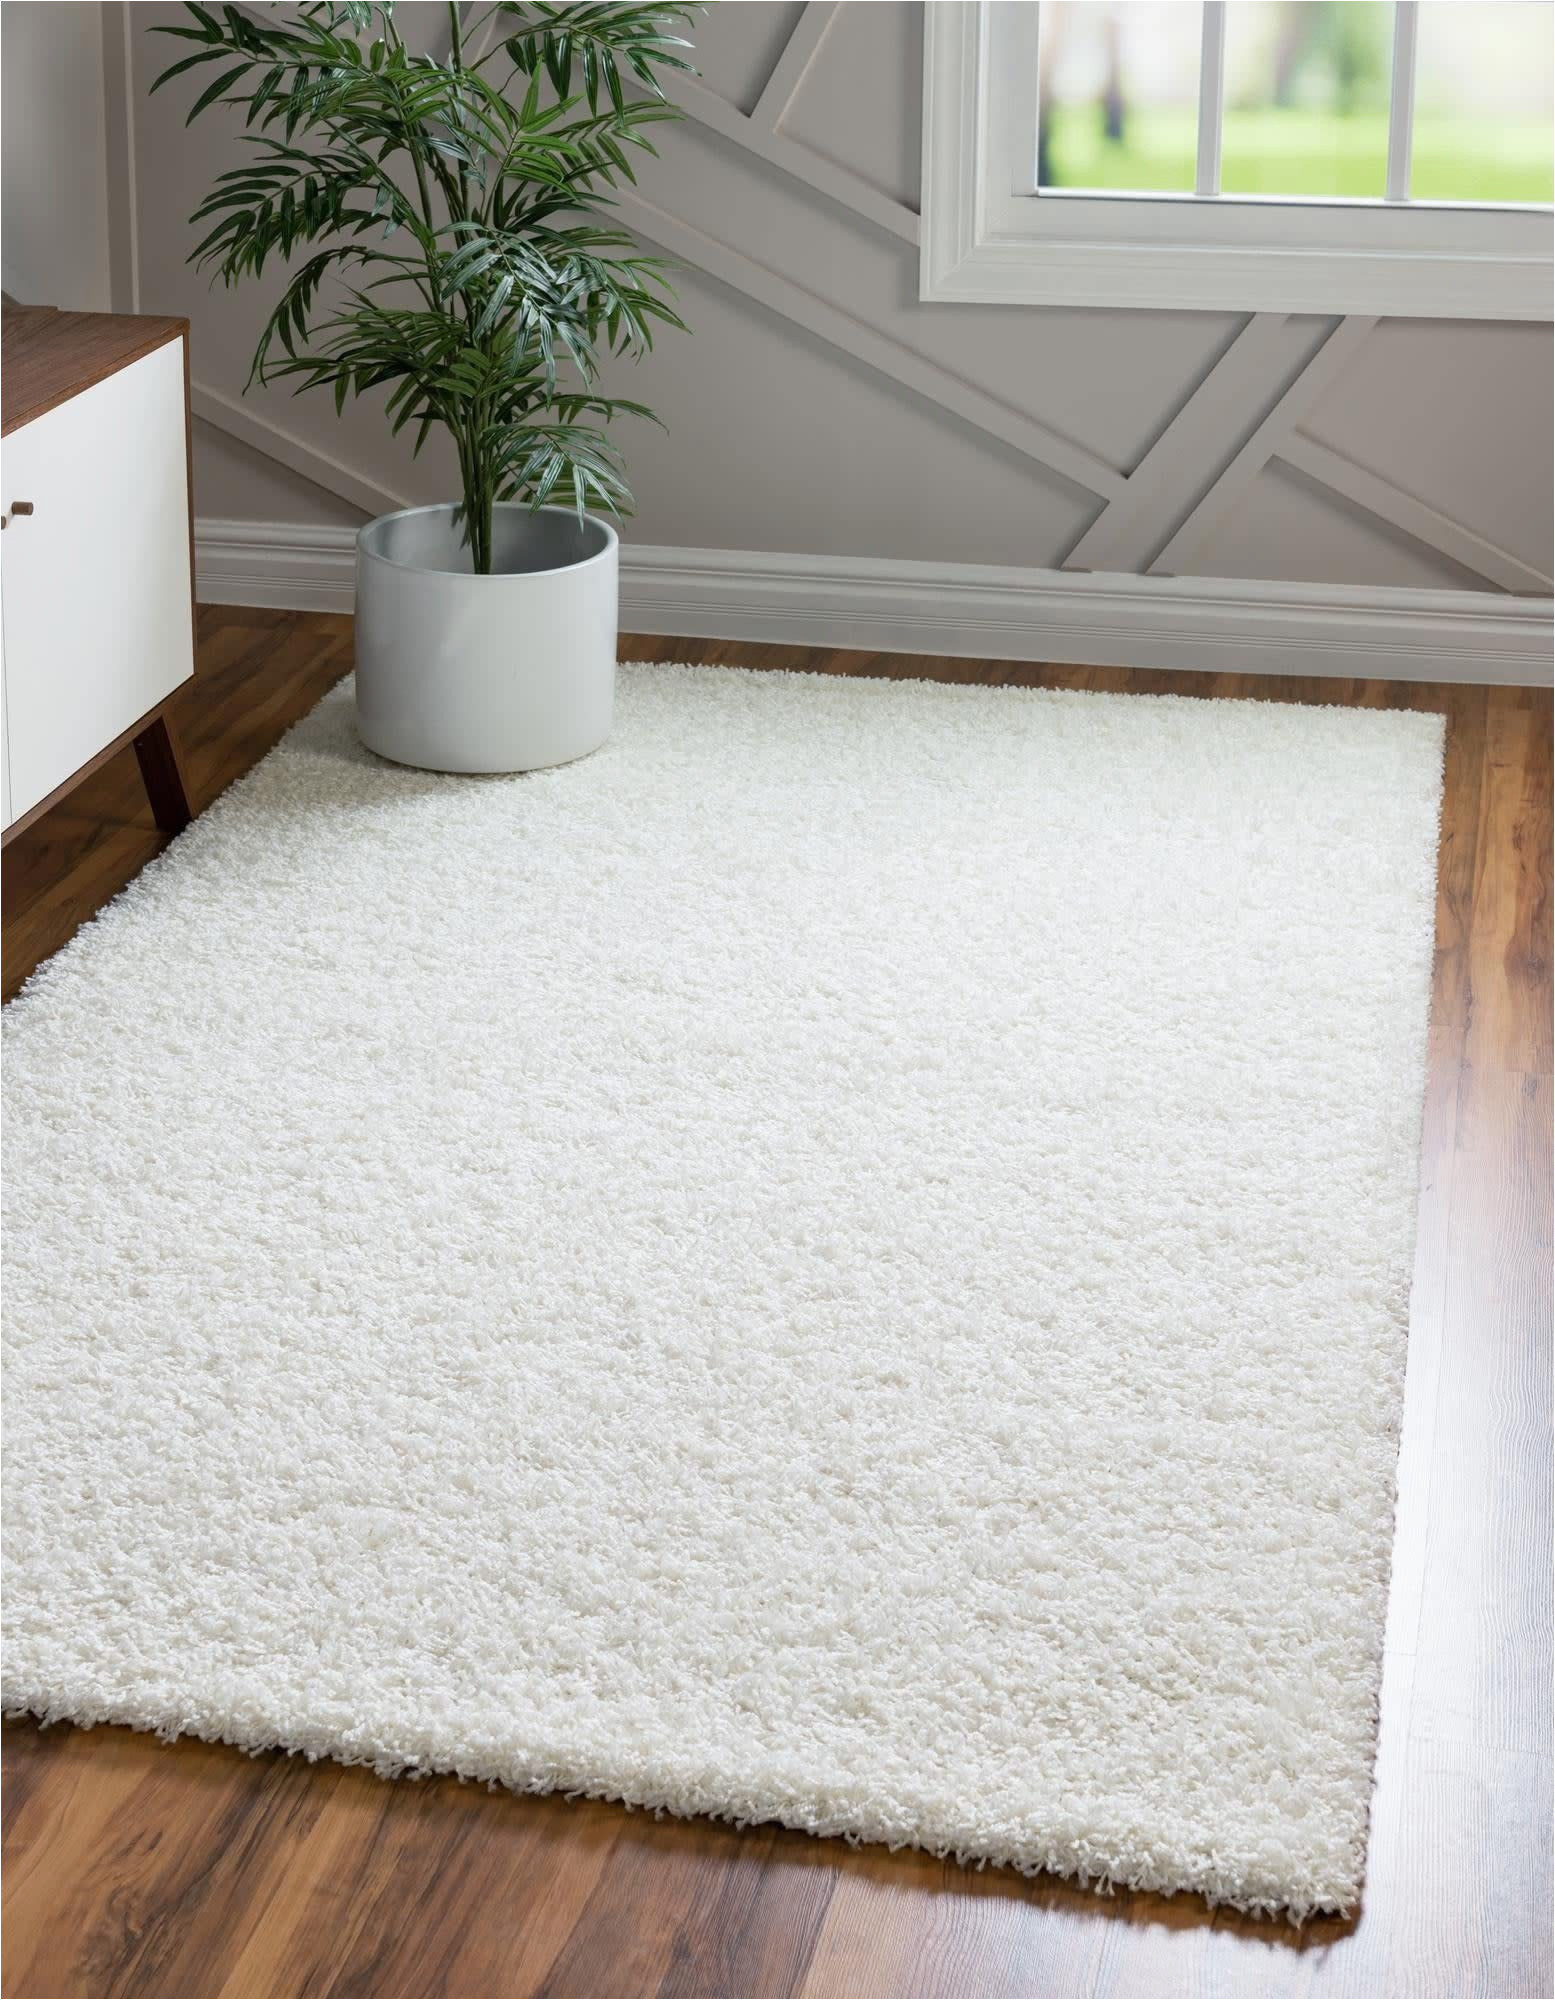 Unique Loom solid Shag area Rug 6 X 9 Unique Loom solo solid Shag Collection area Modern Plush Rug Lush & soft, 5 Ft 0 X 8 Ft 0, Snow White